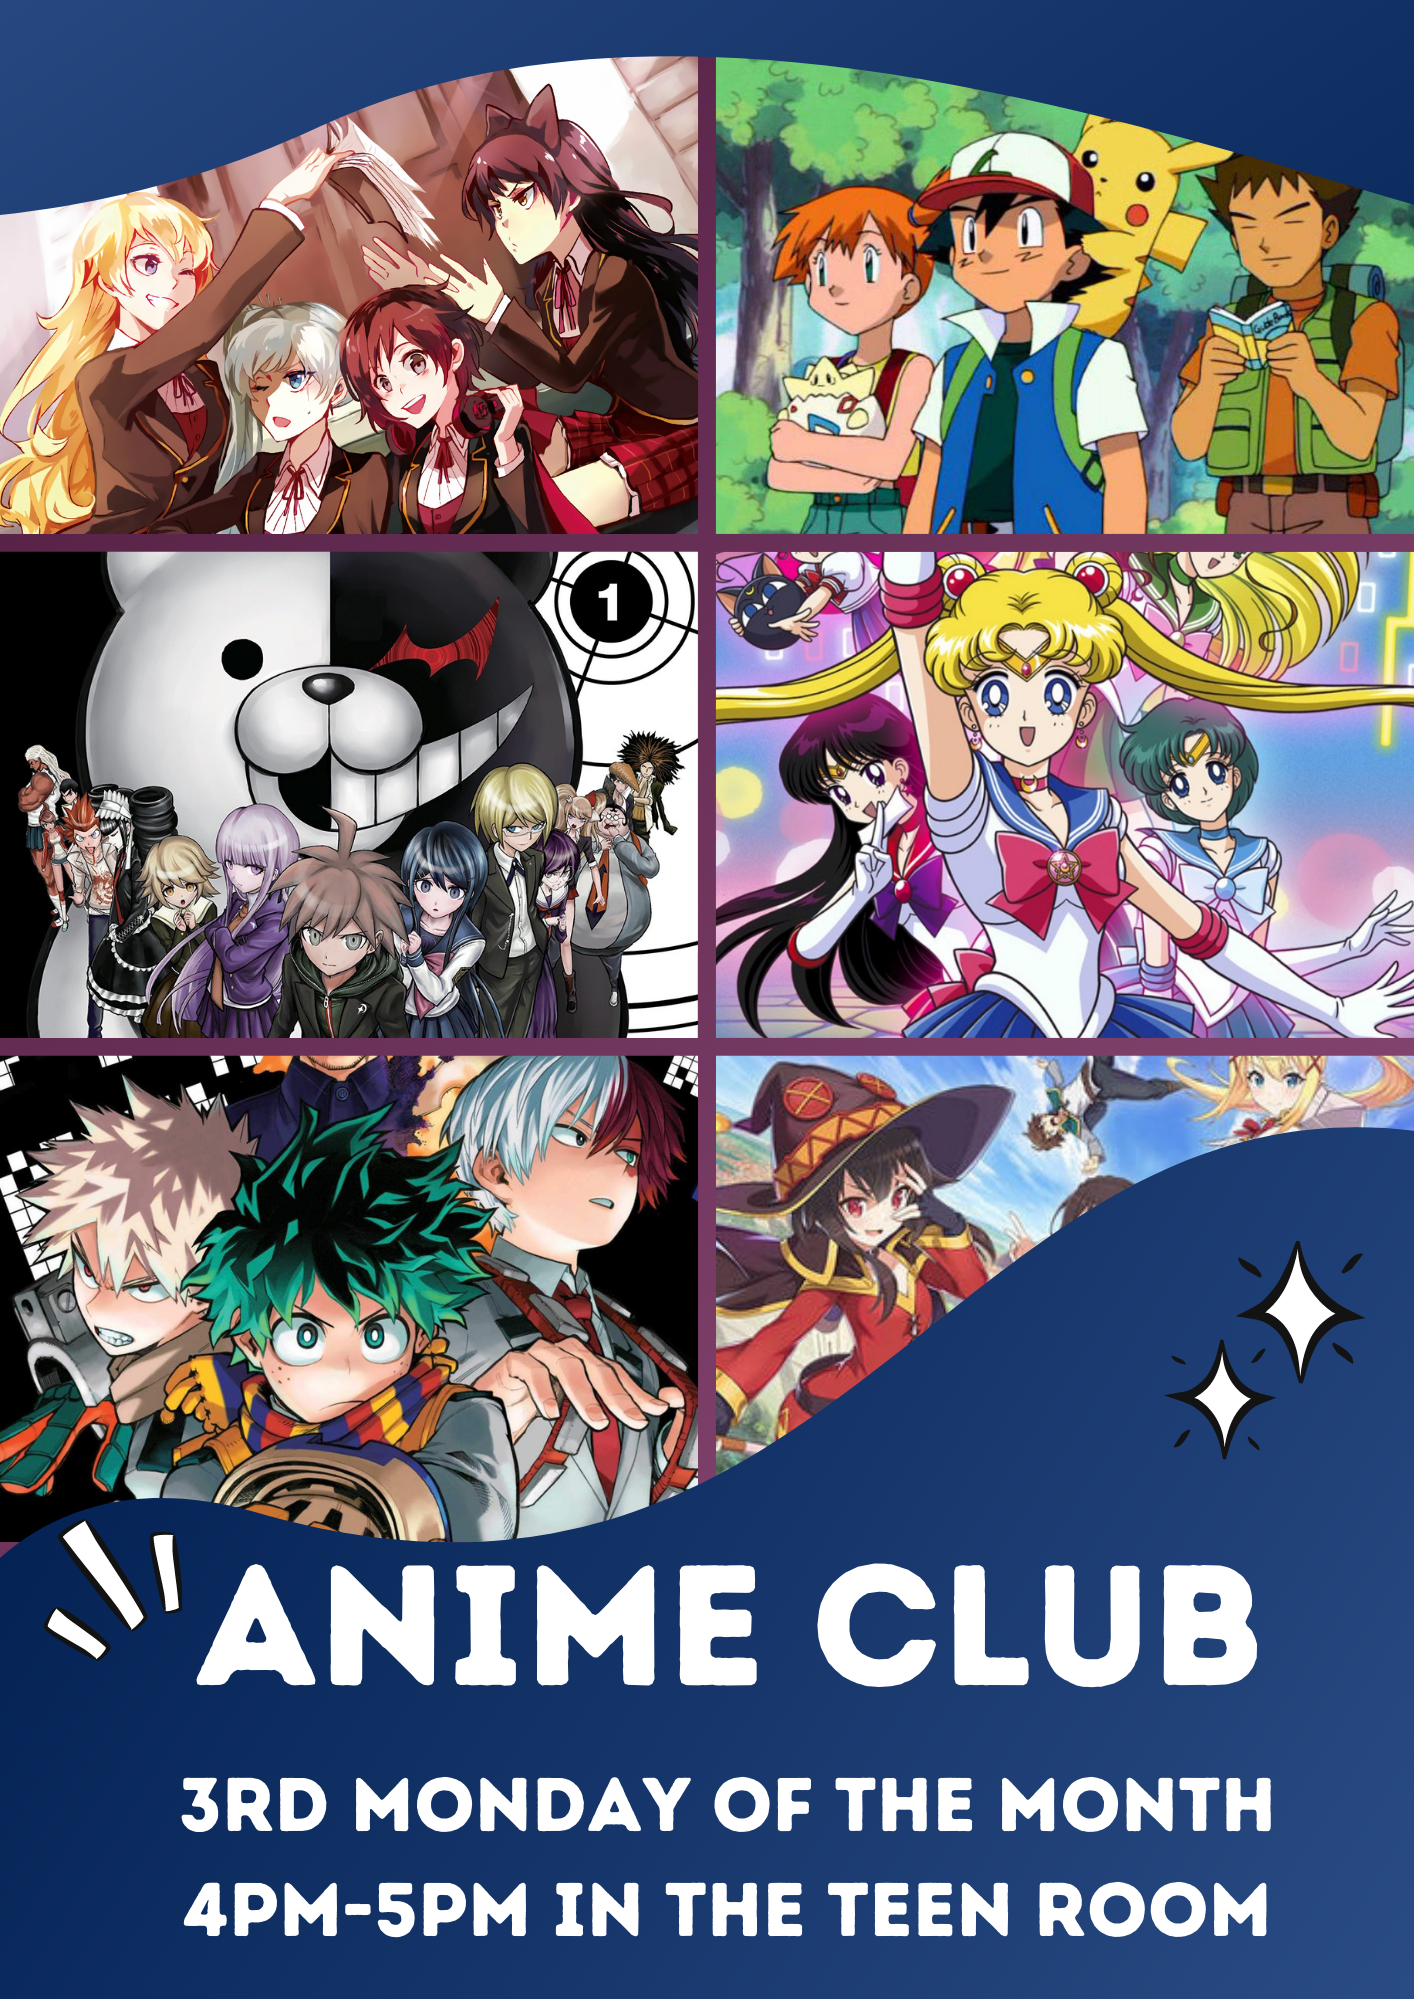 Anime Club in white with blue background. 